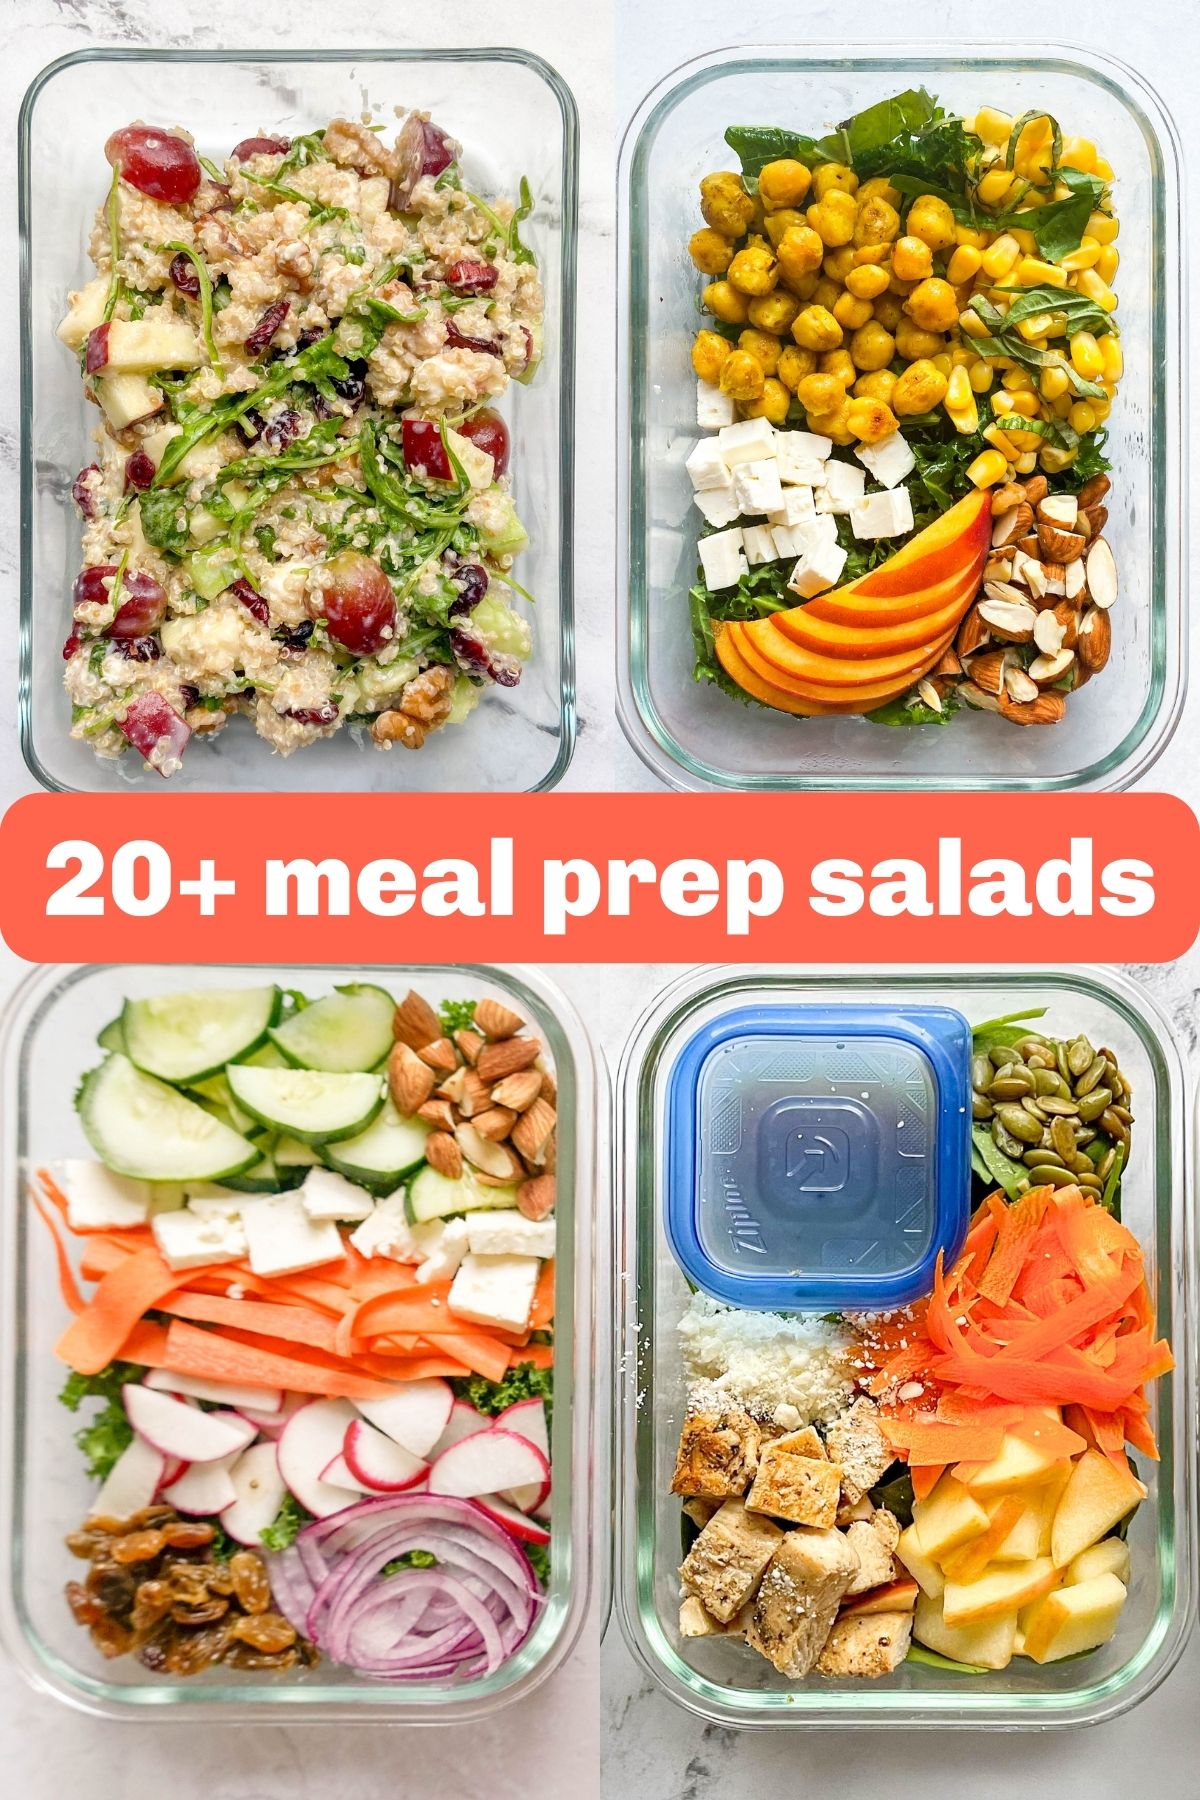 four salads in glass containers and text "20+ meal prep salads"